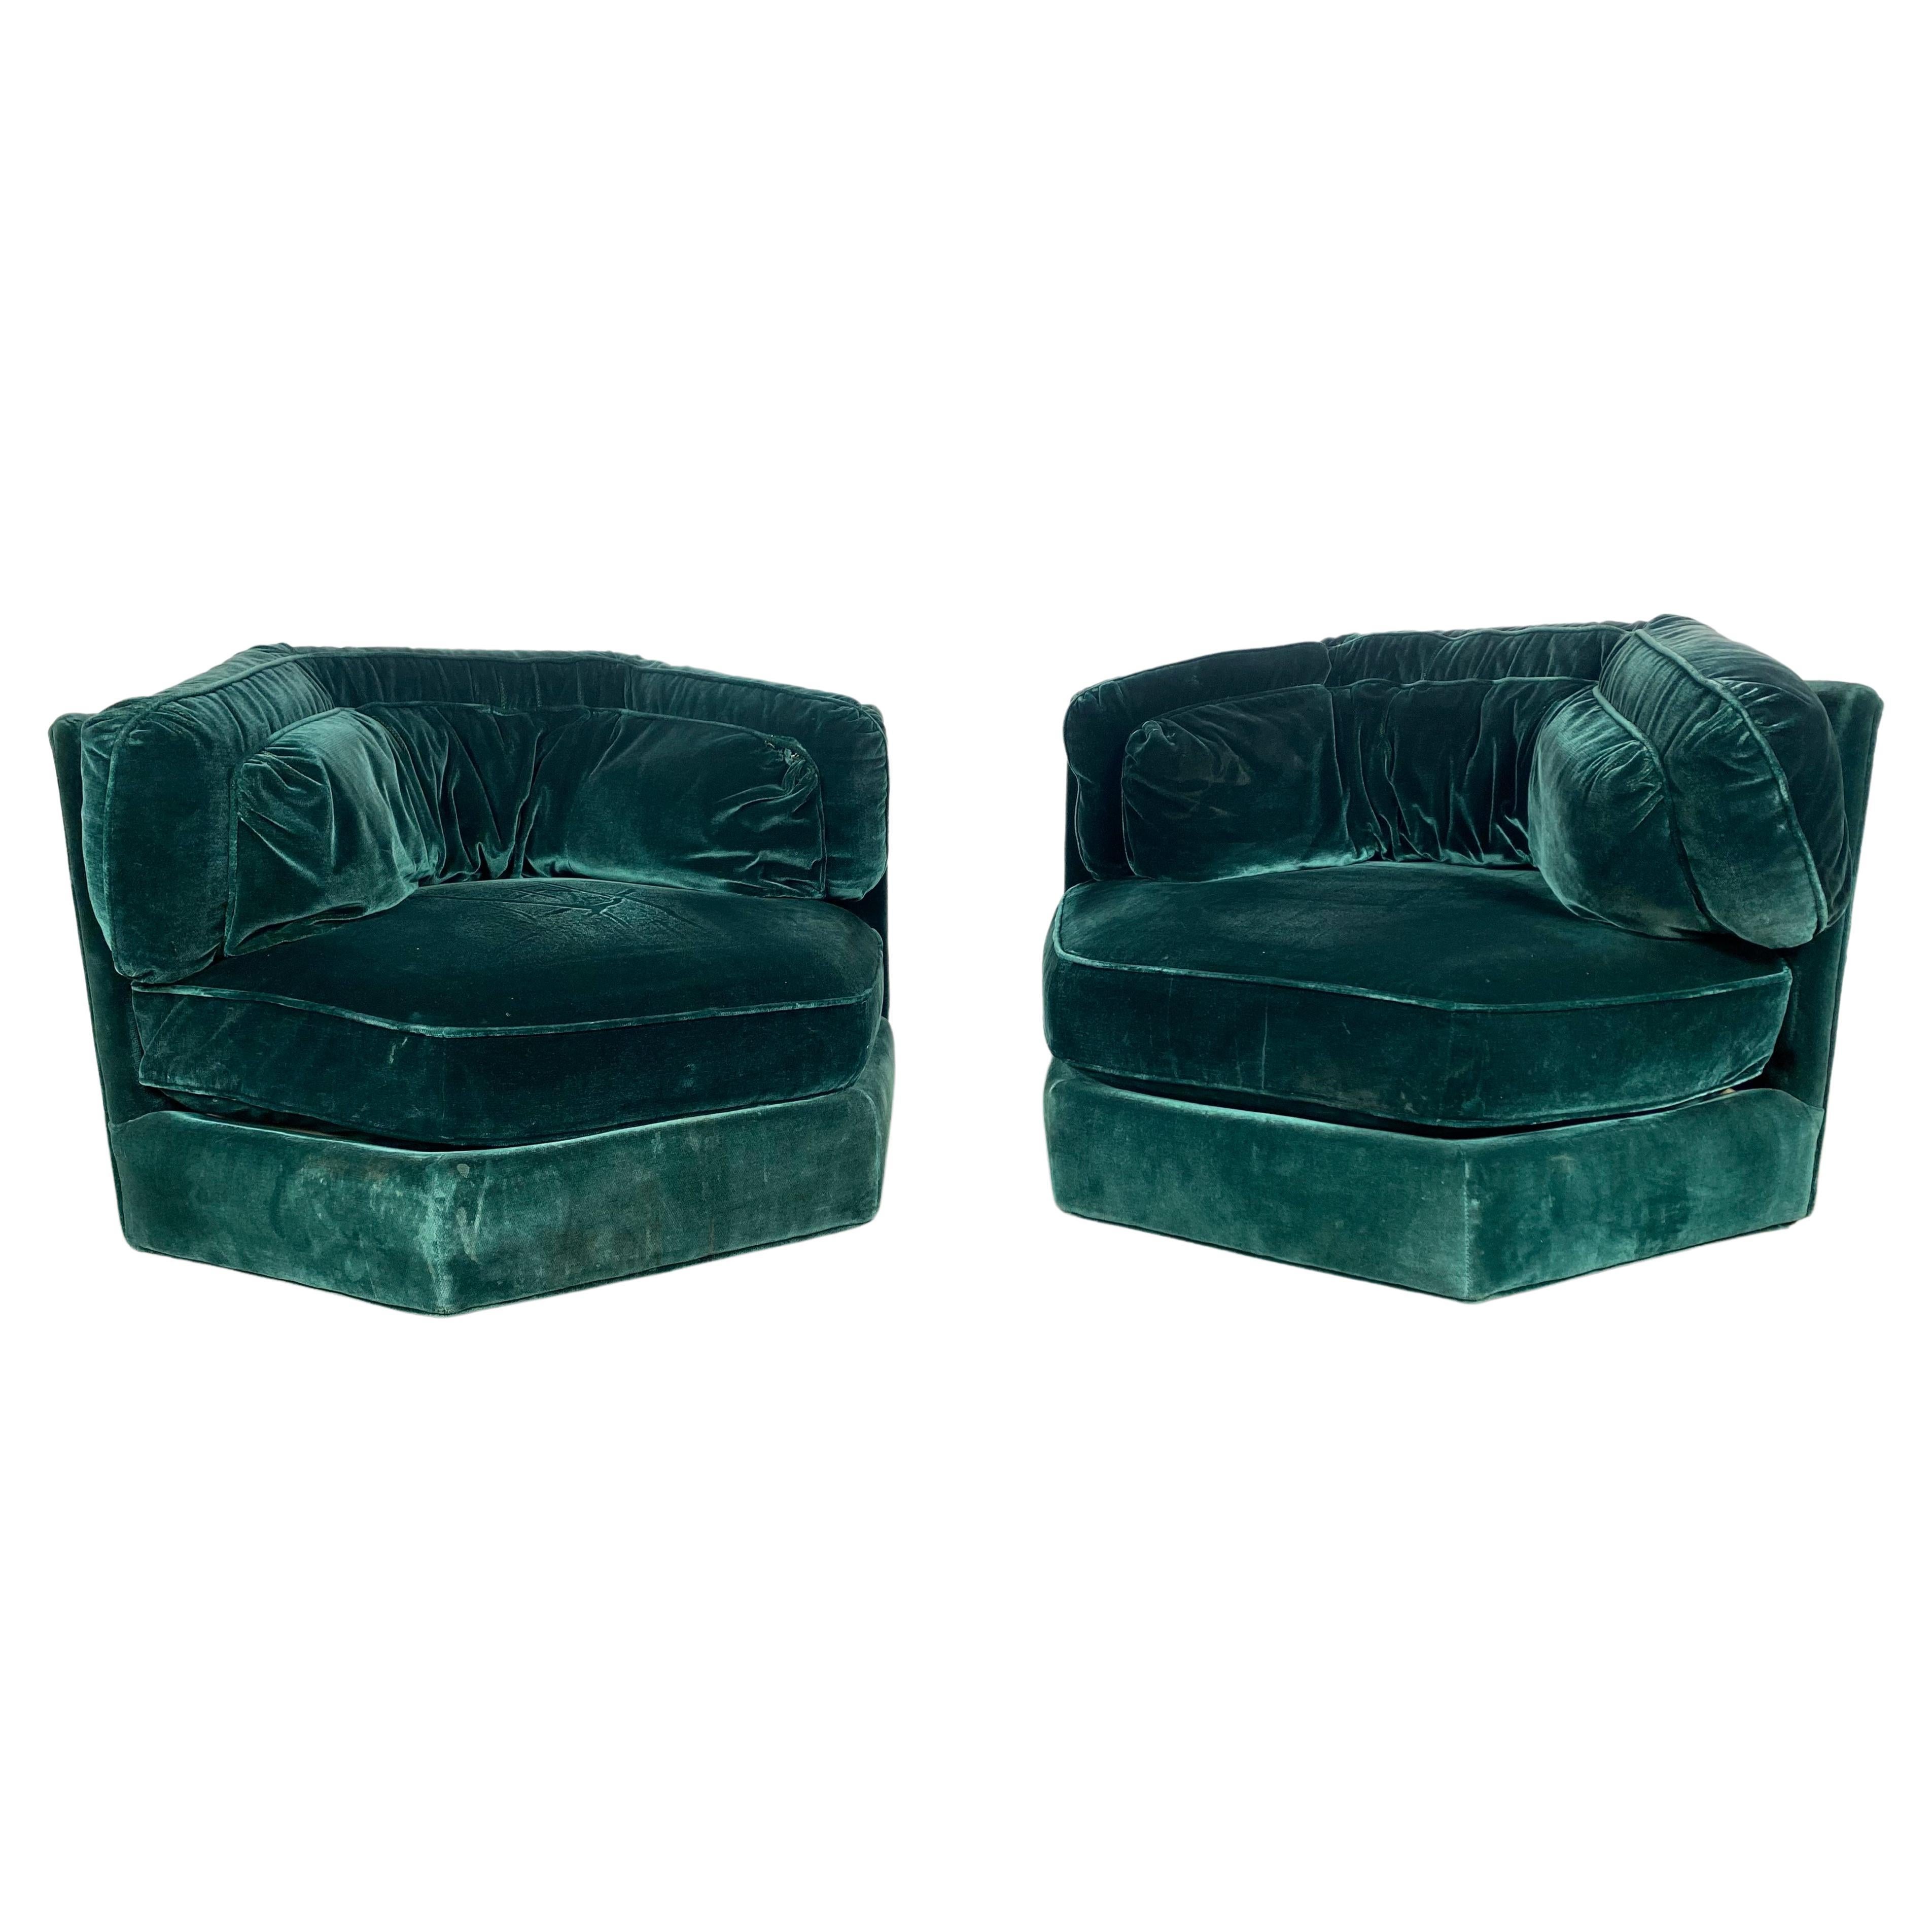 Matching Pair 1970s Emerald Green Mohair Hex Lounge Chairs "Flair" Bernhardt For Sale